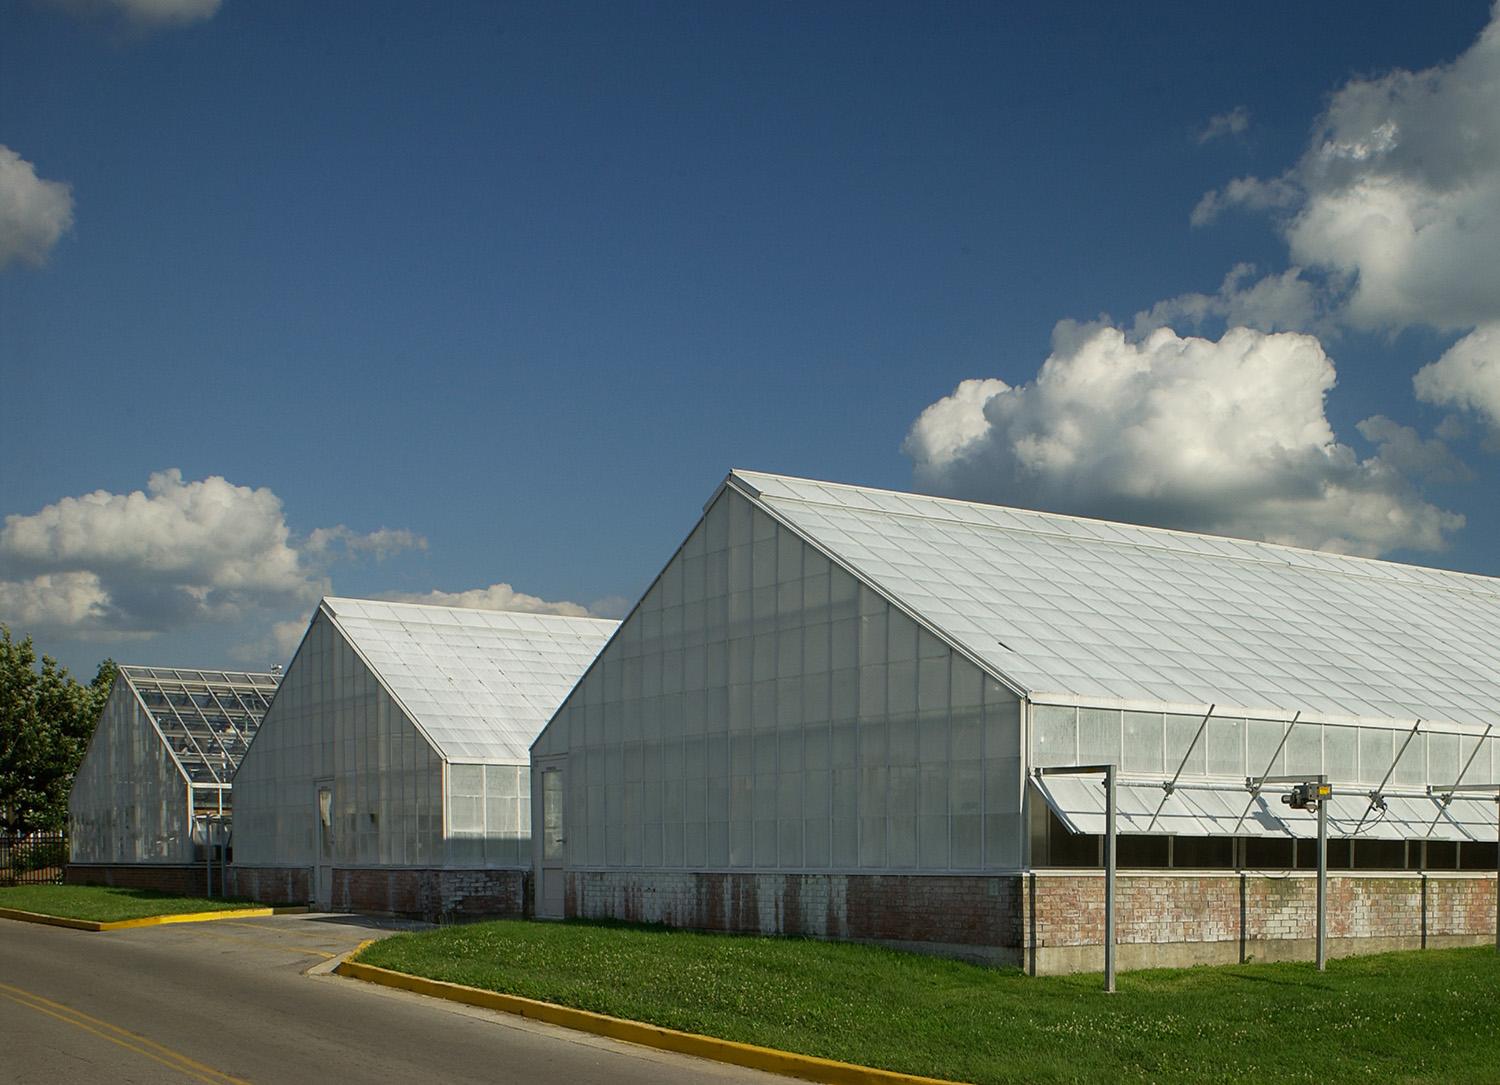 On-campus greenhouses